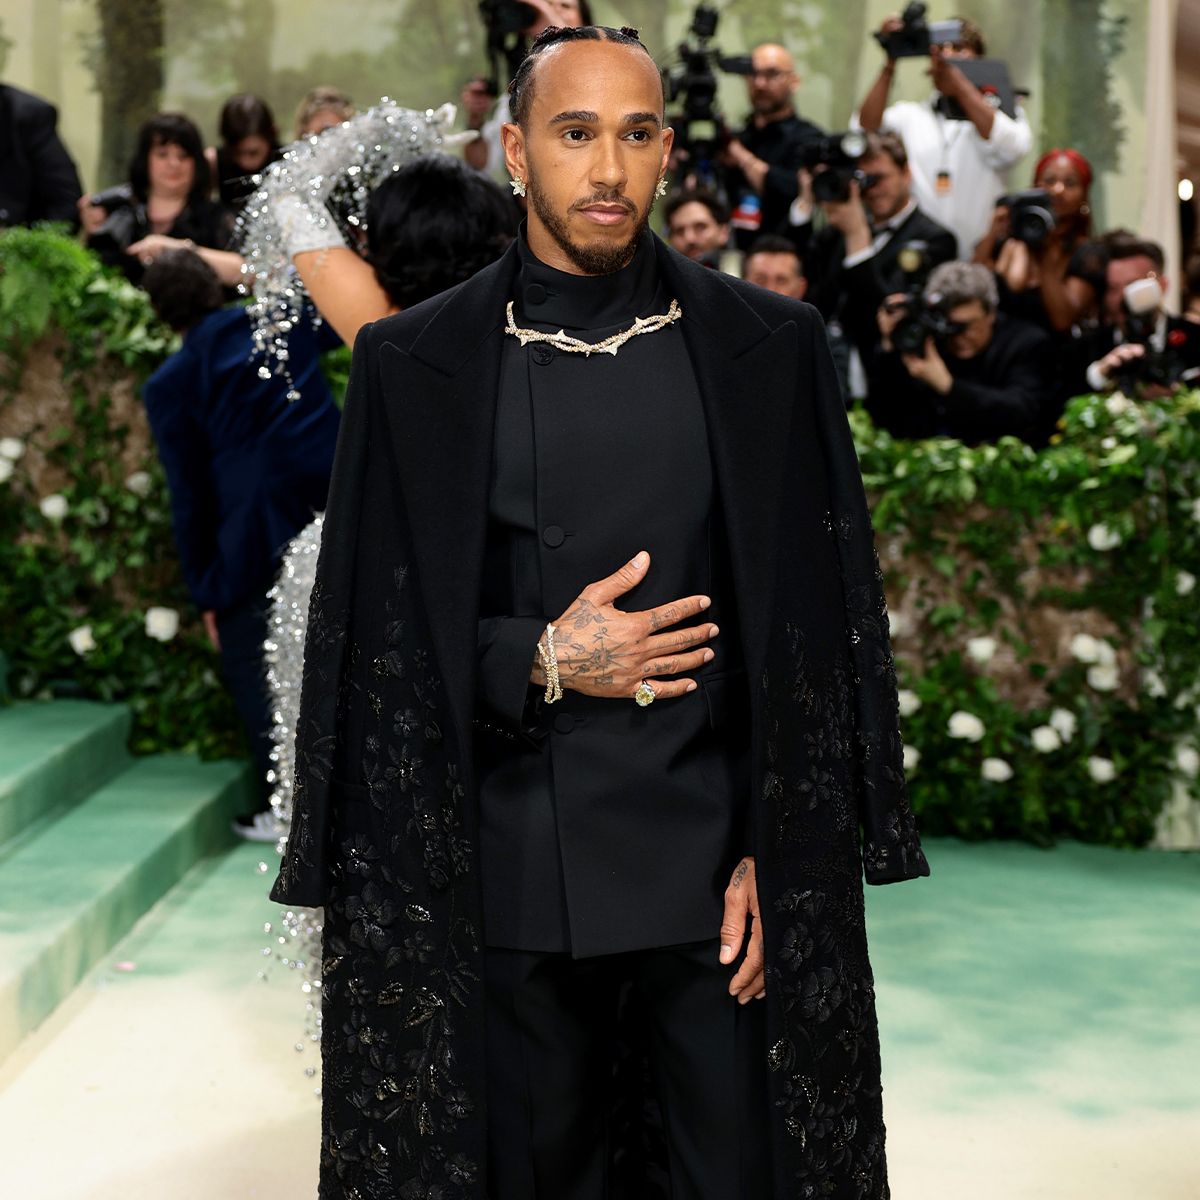 Lewis Hamilton Understood the Assignment at This Year's Met Gala